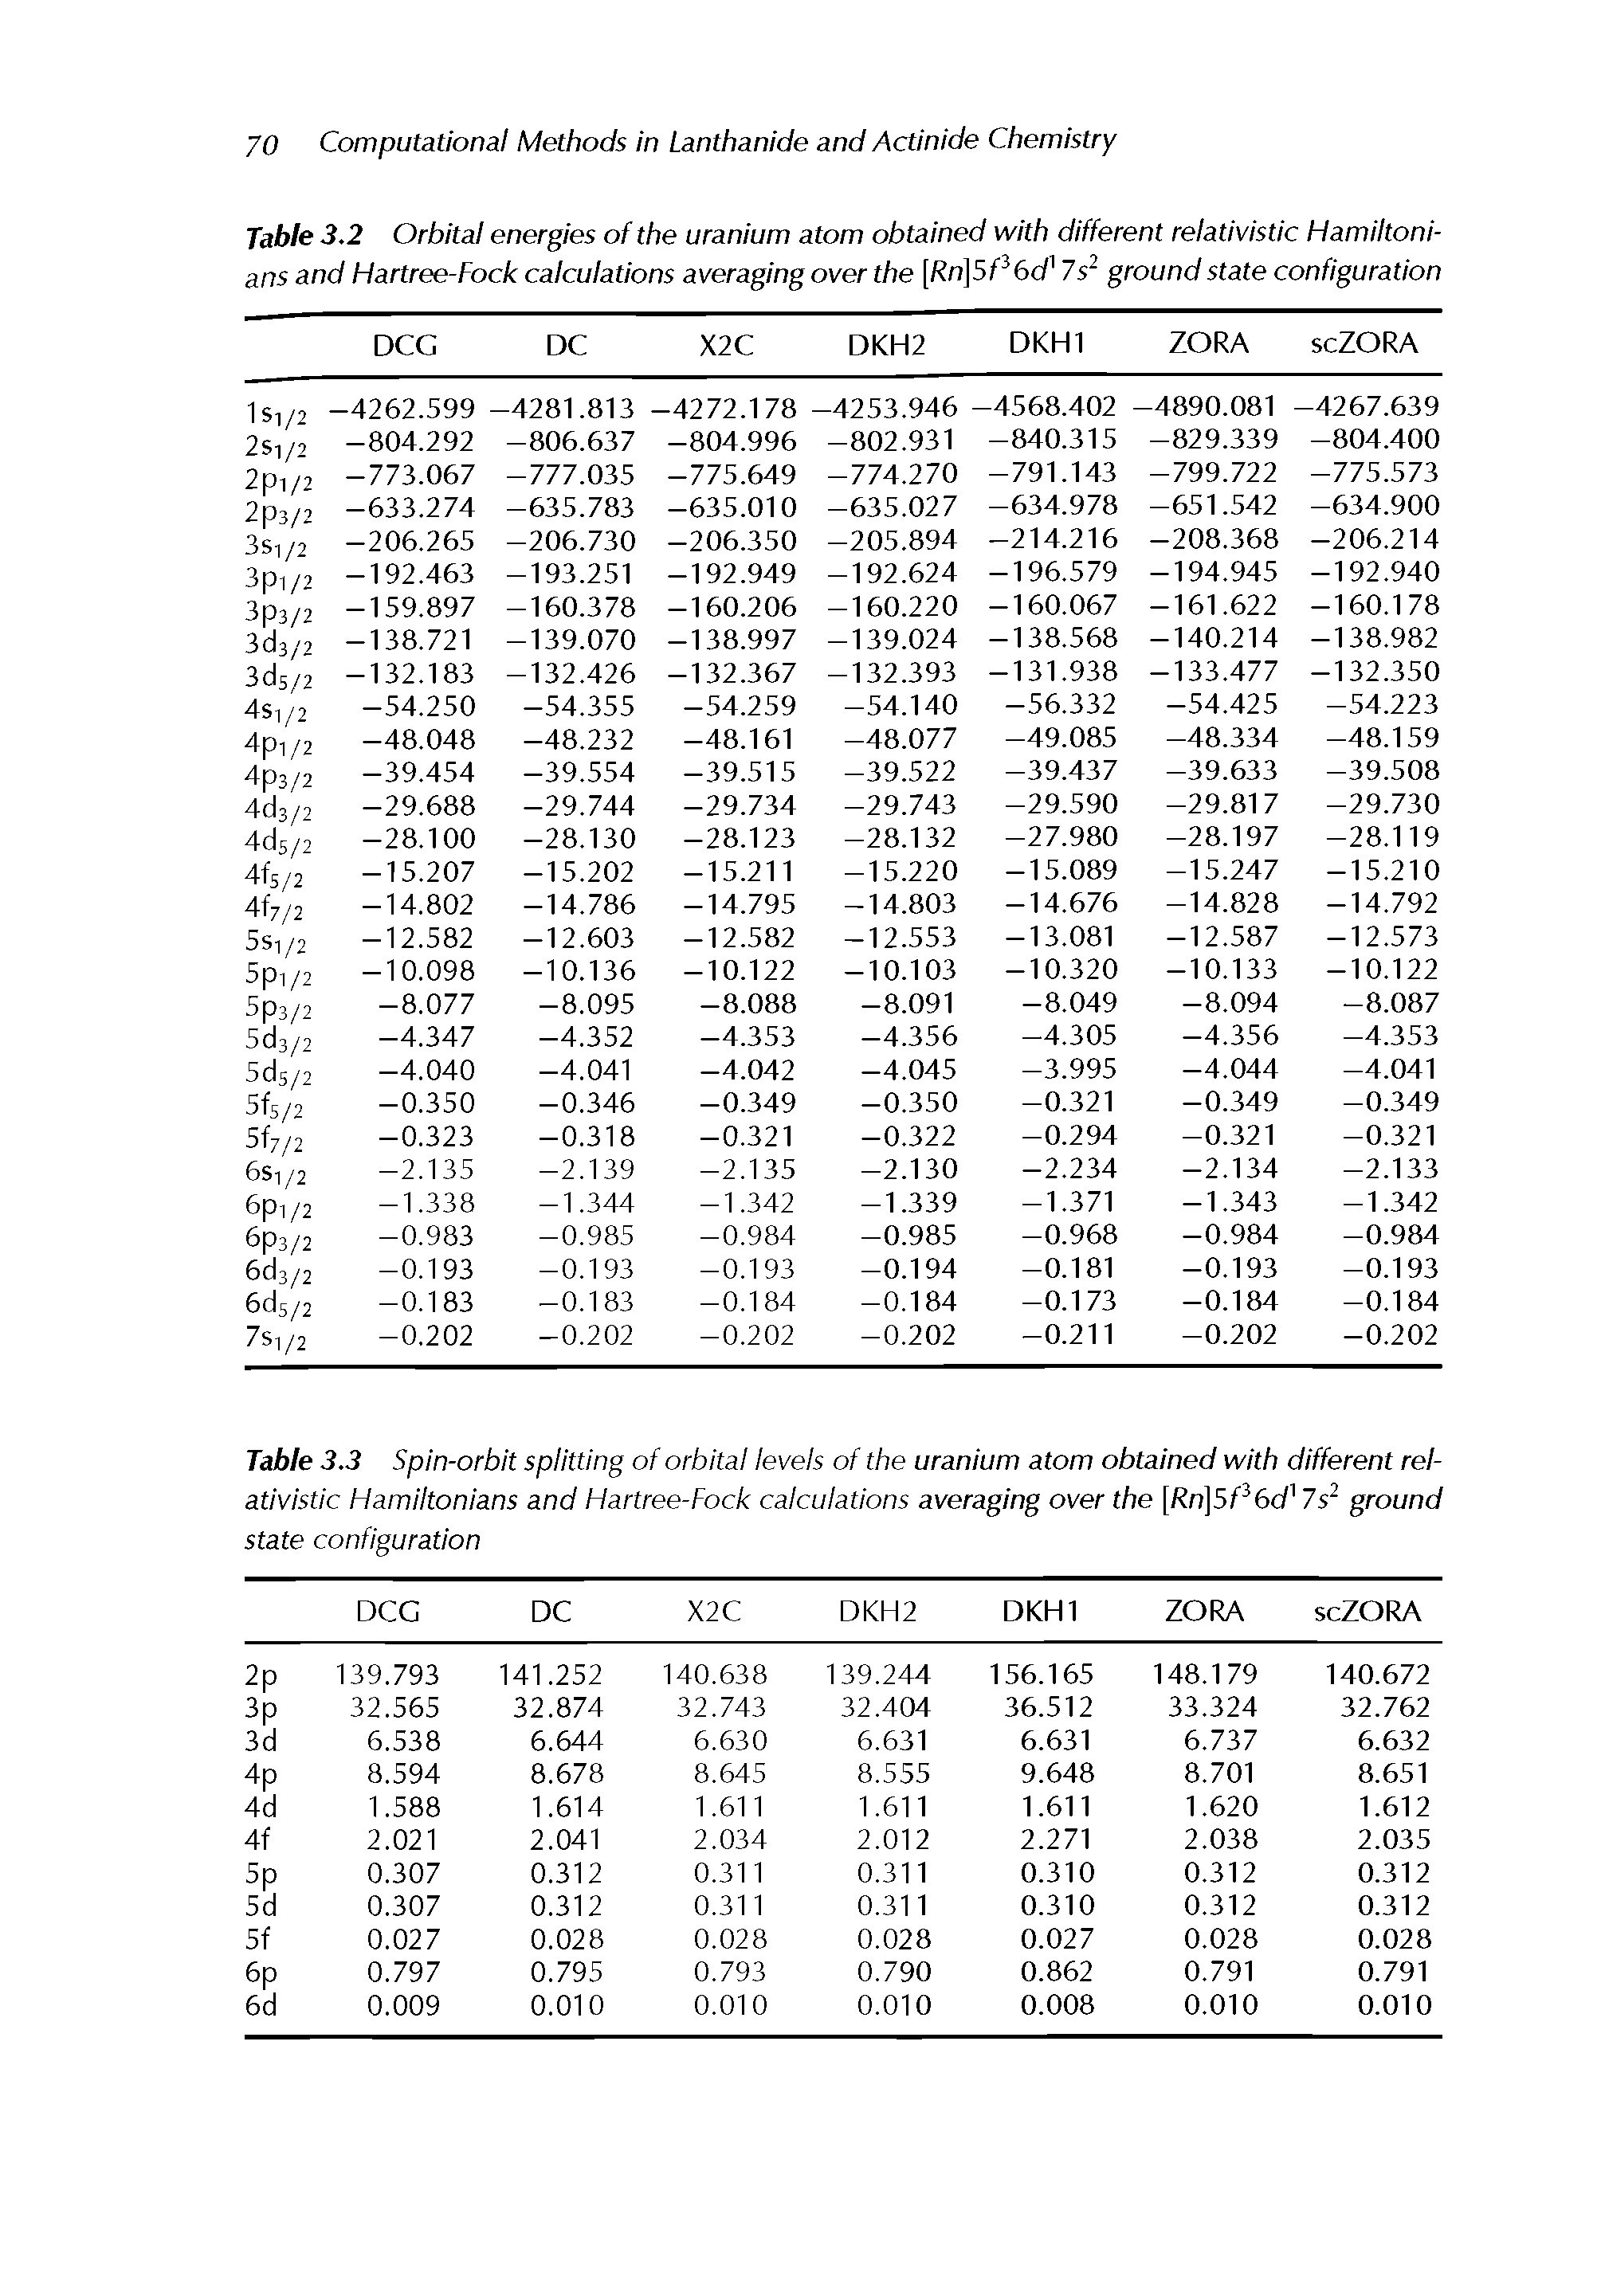 Table 3.3 Spin-orbit splitting of orbital levels of the uranium atom obtained with different relativistic Hamiltonians and Hartree-Fock calculations averaging over the [Rn]5P6d iP ground state configuration...